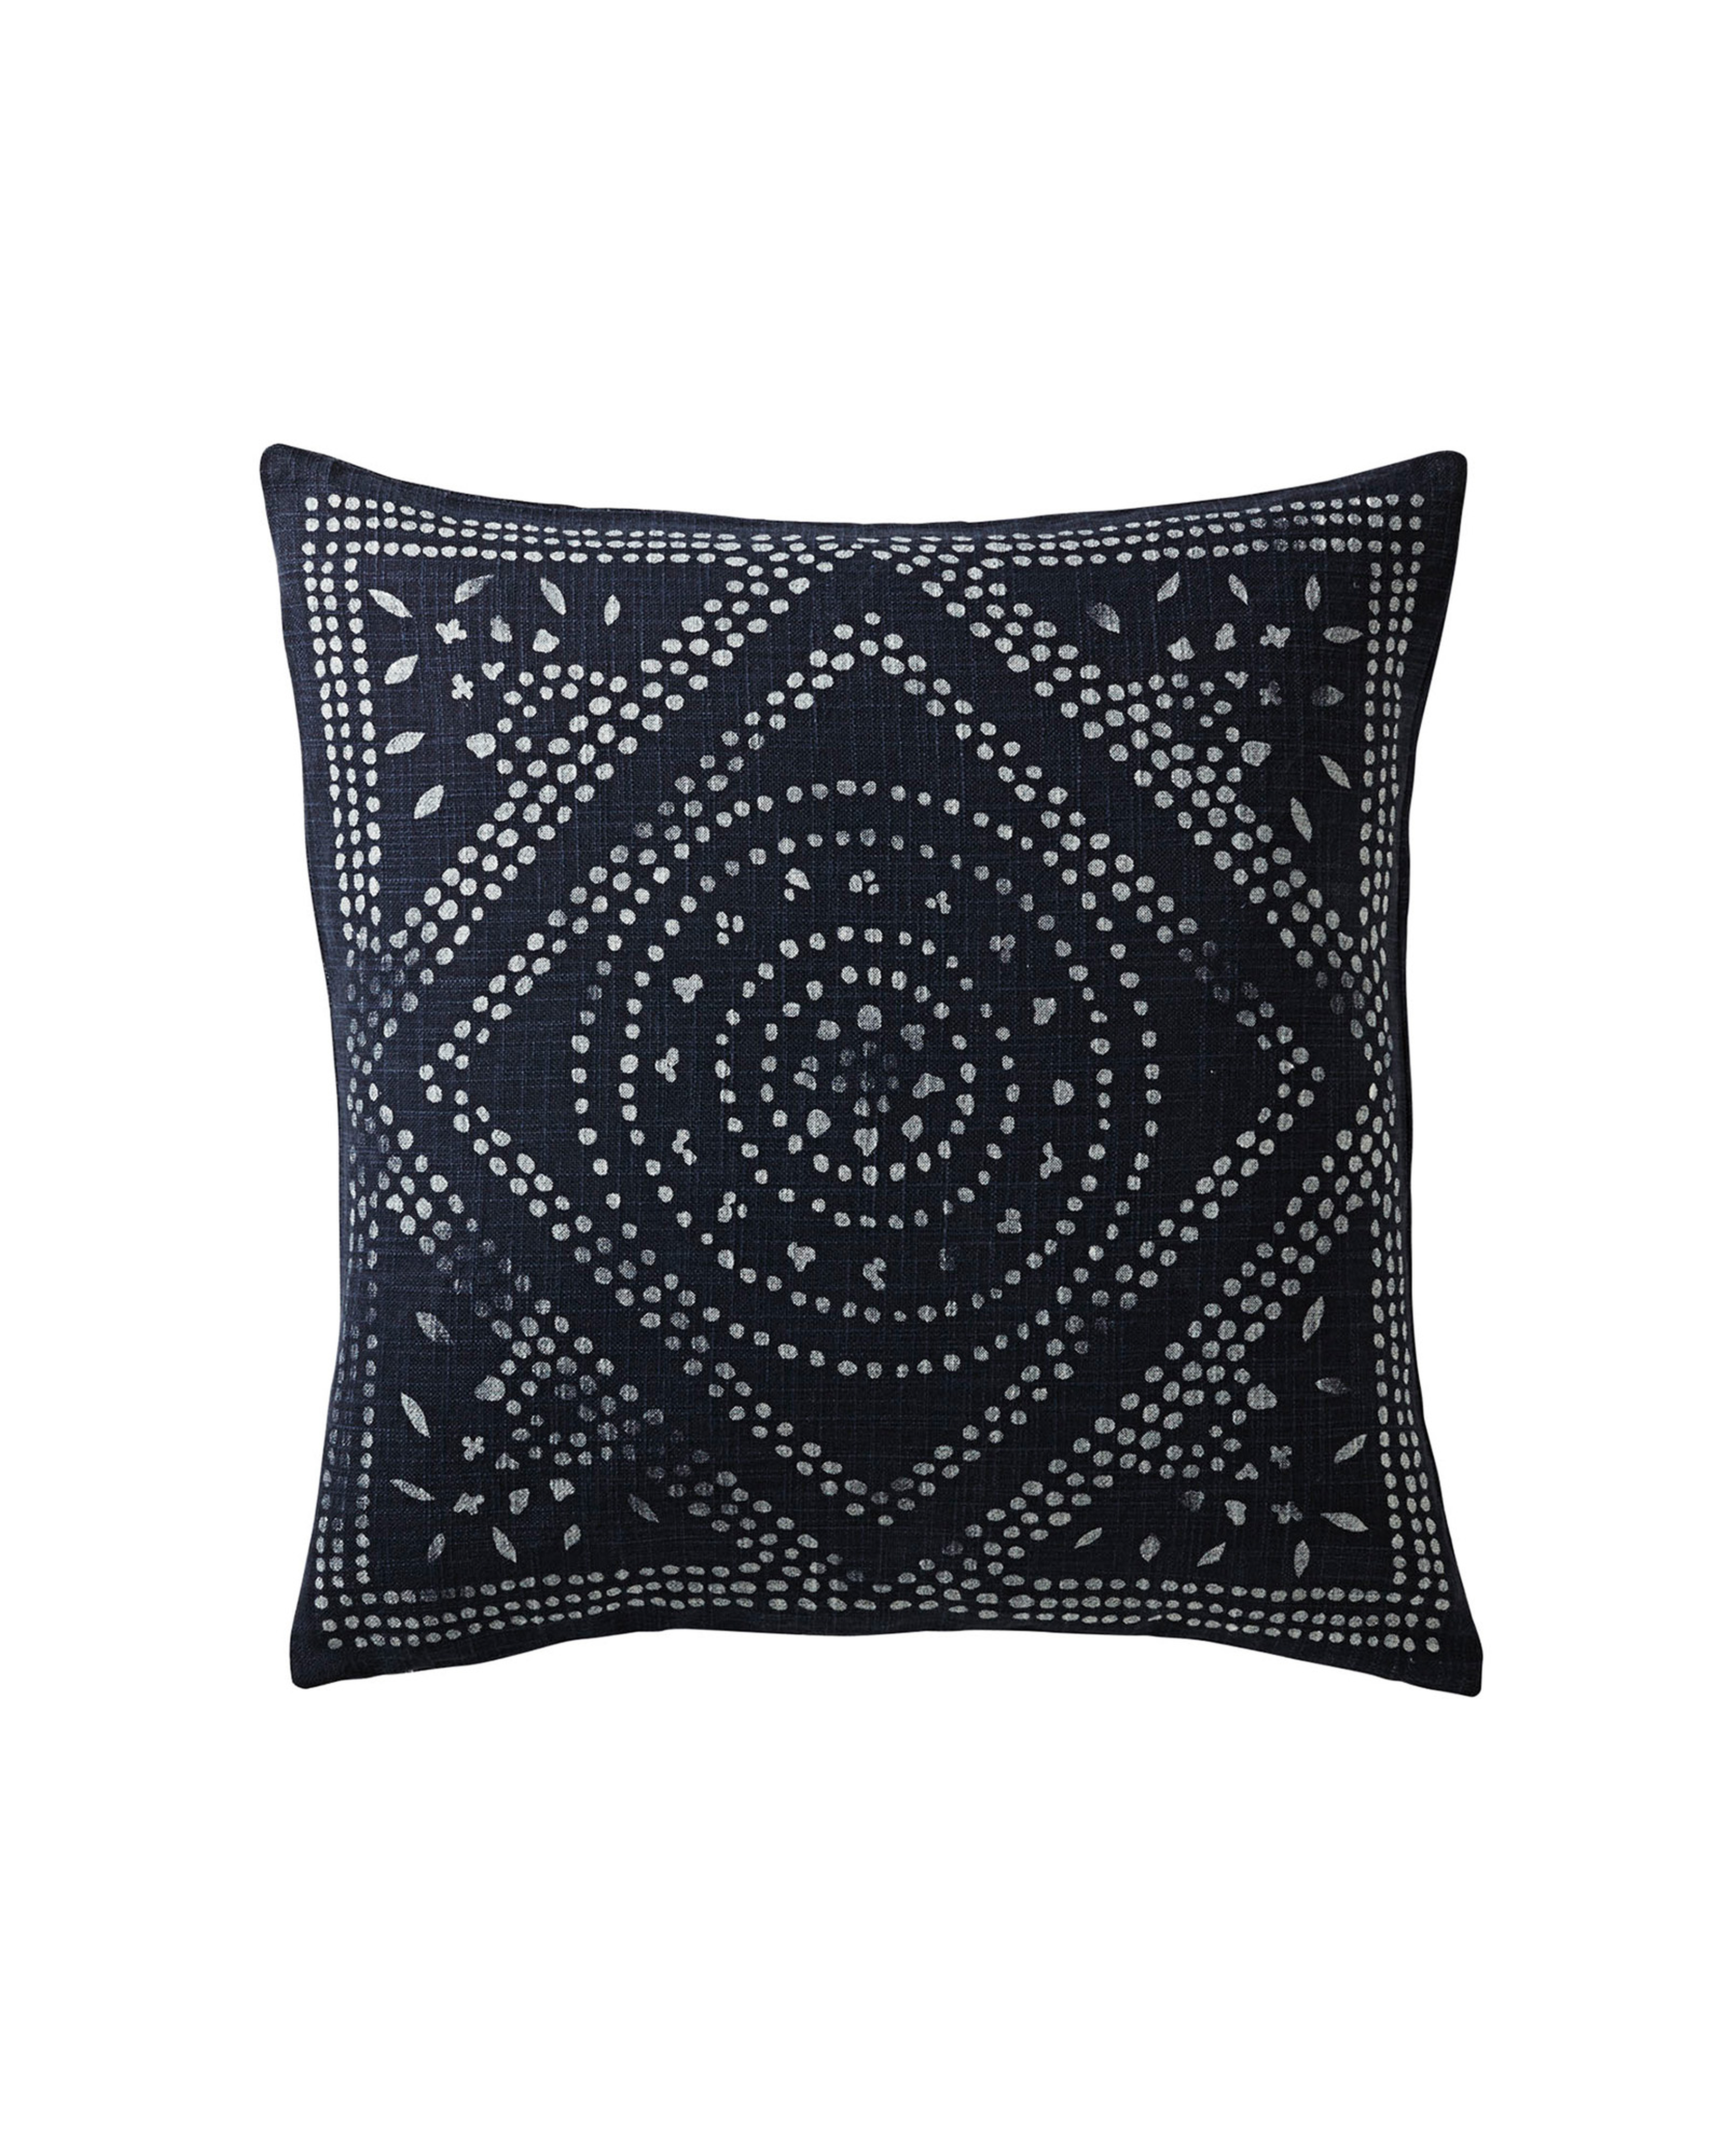 Camille Diamond Medallion 20"SQ. Pillow Cover - Indigo - Insert sold separately - Serena and Lily